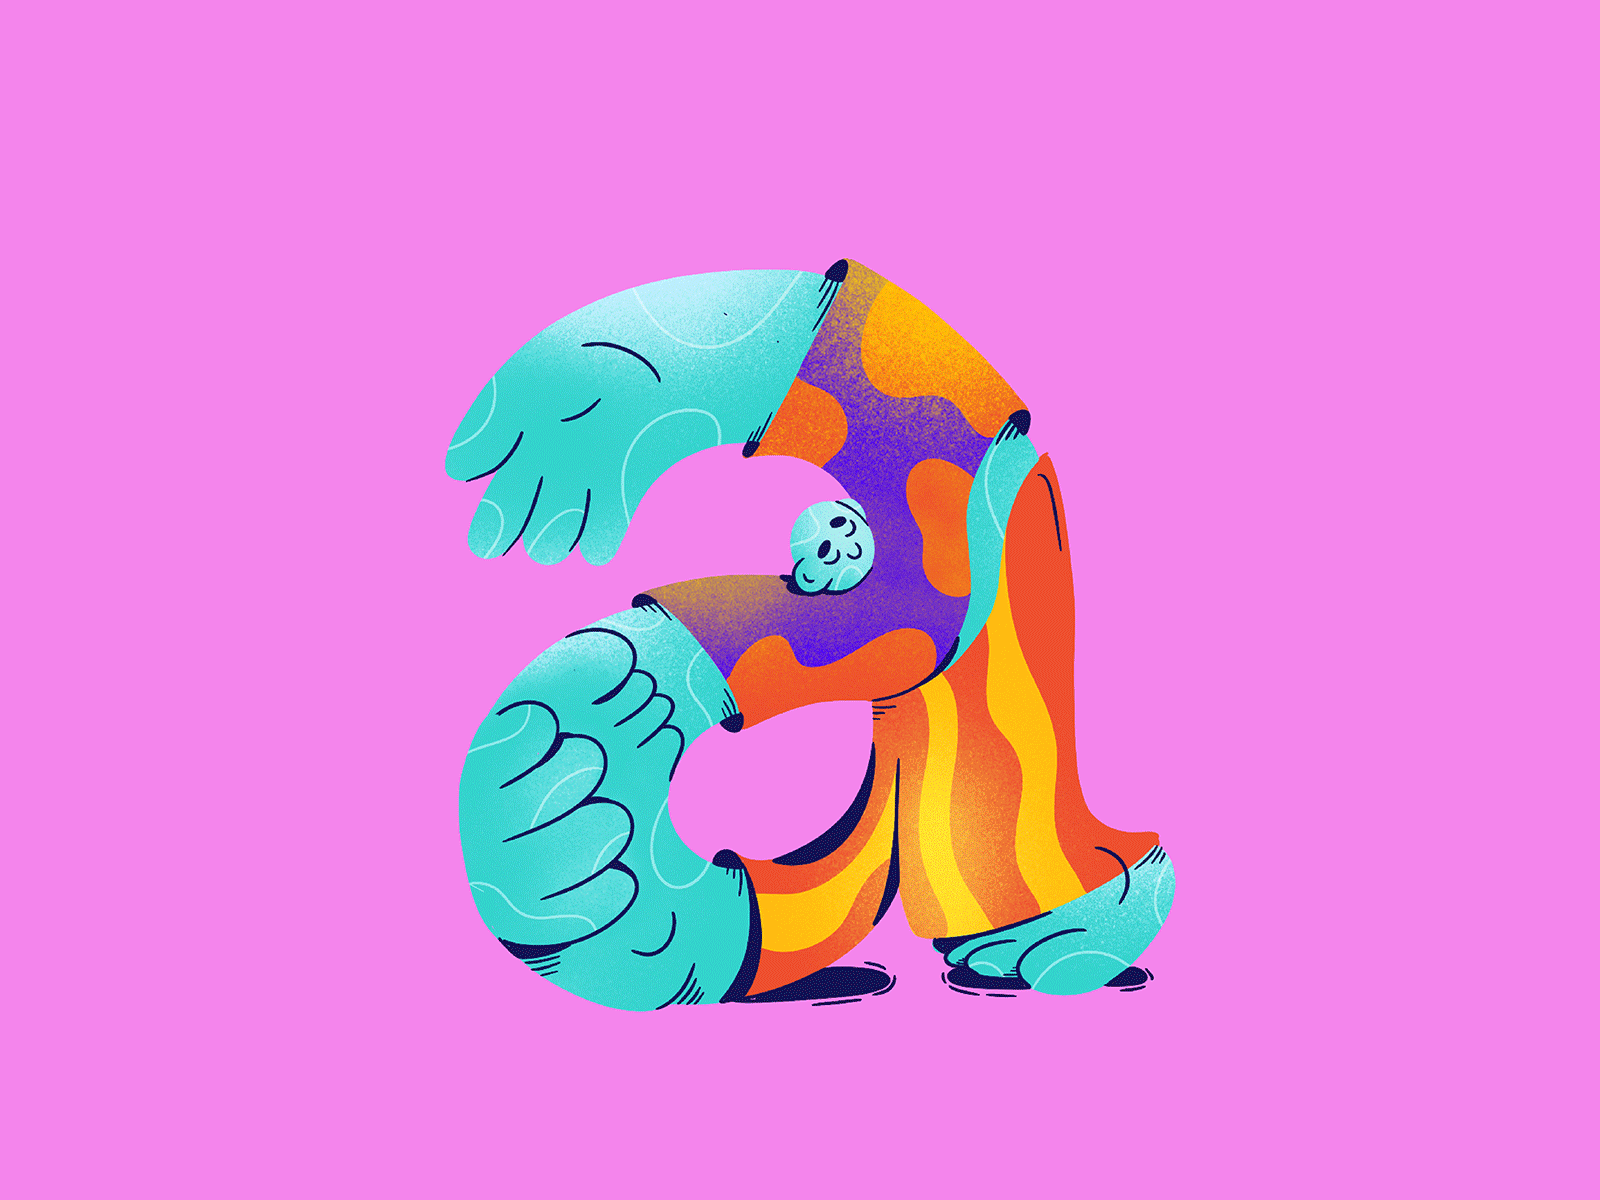 36 Days of Type 2023 2d 36daysoftype character color colorful illustration outfits procreate type yoga yogaposes